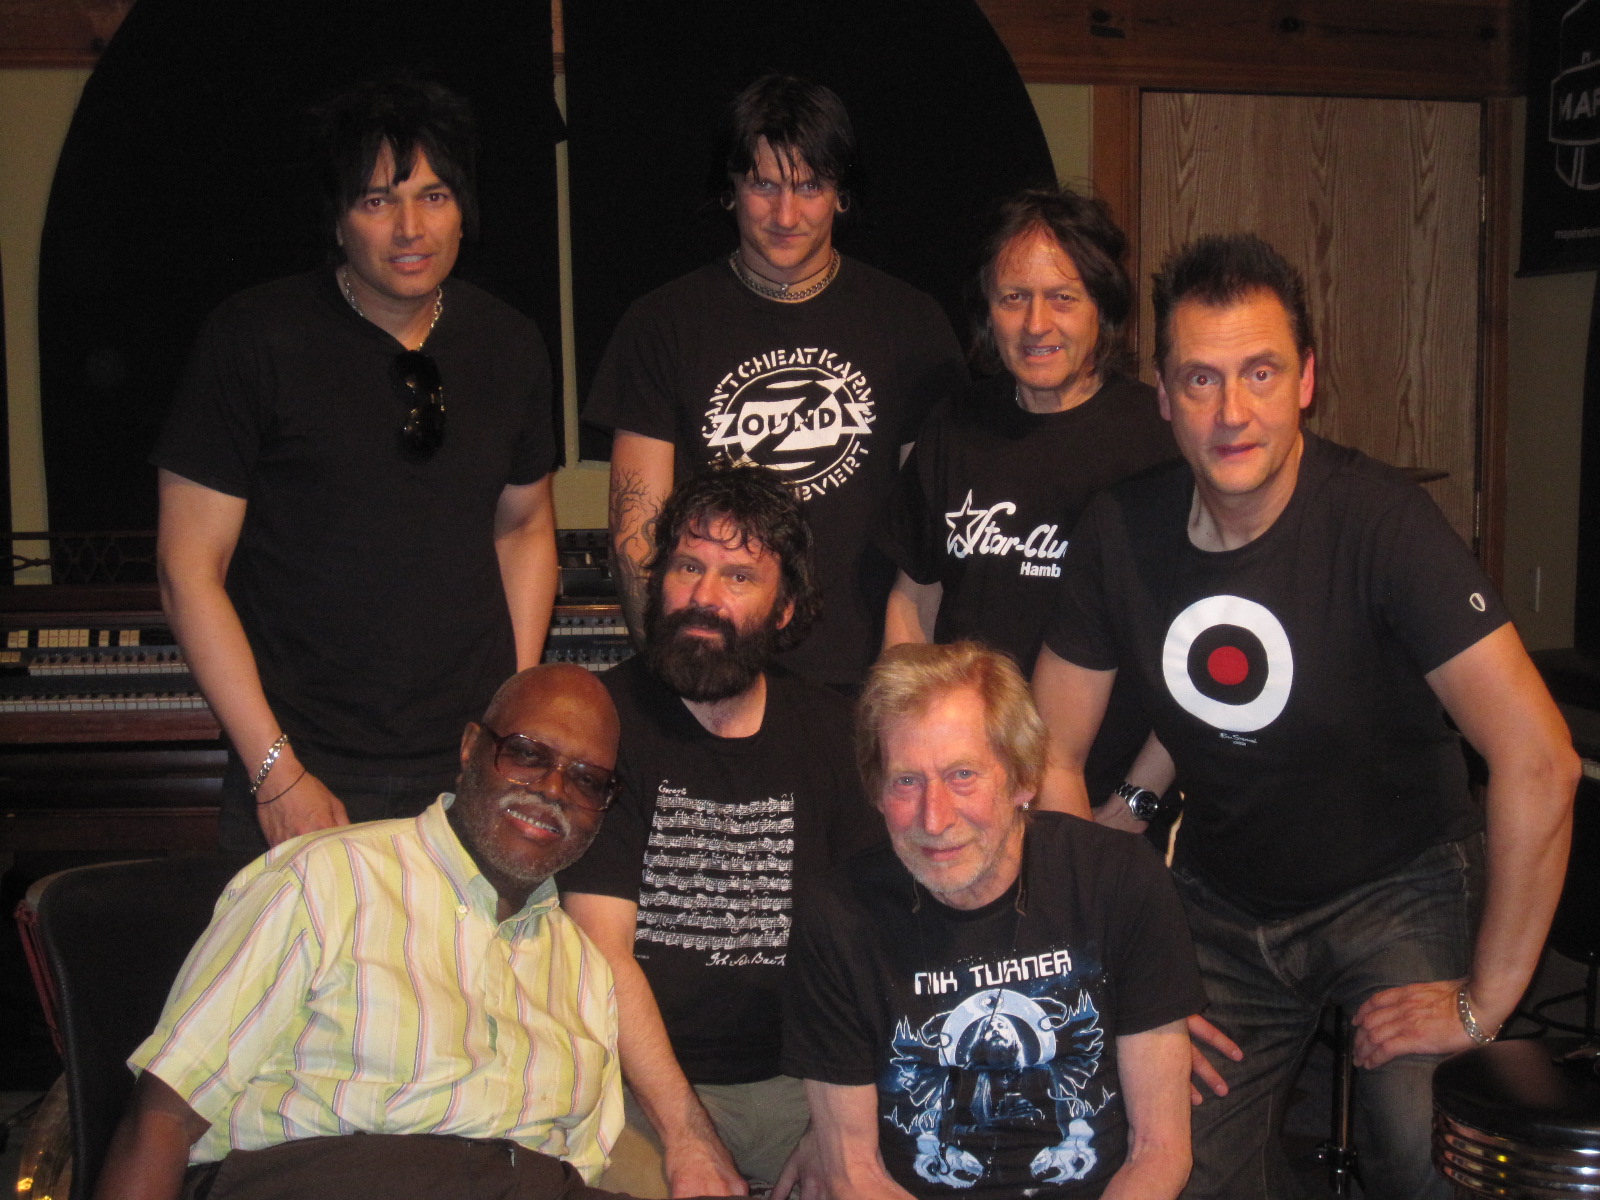 The whole crew. Back row, Brian (Cleopatra records), Jason Willer, Jeff Piccinini (Geoff Myles), Jürgen Engler. Front row: Big Jay McNeely, Nicky Garratt and Nik Turner. Click image to enlarge.